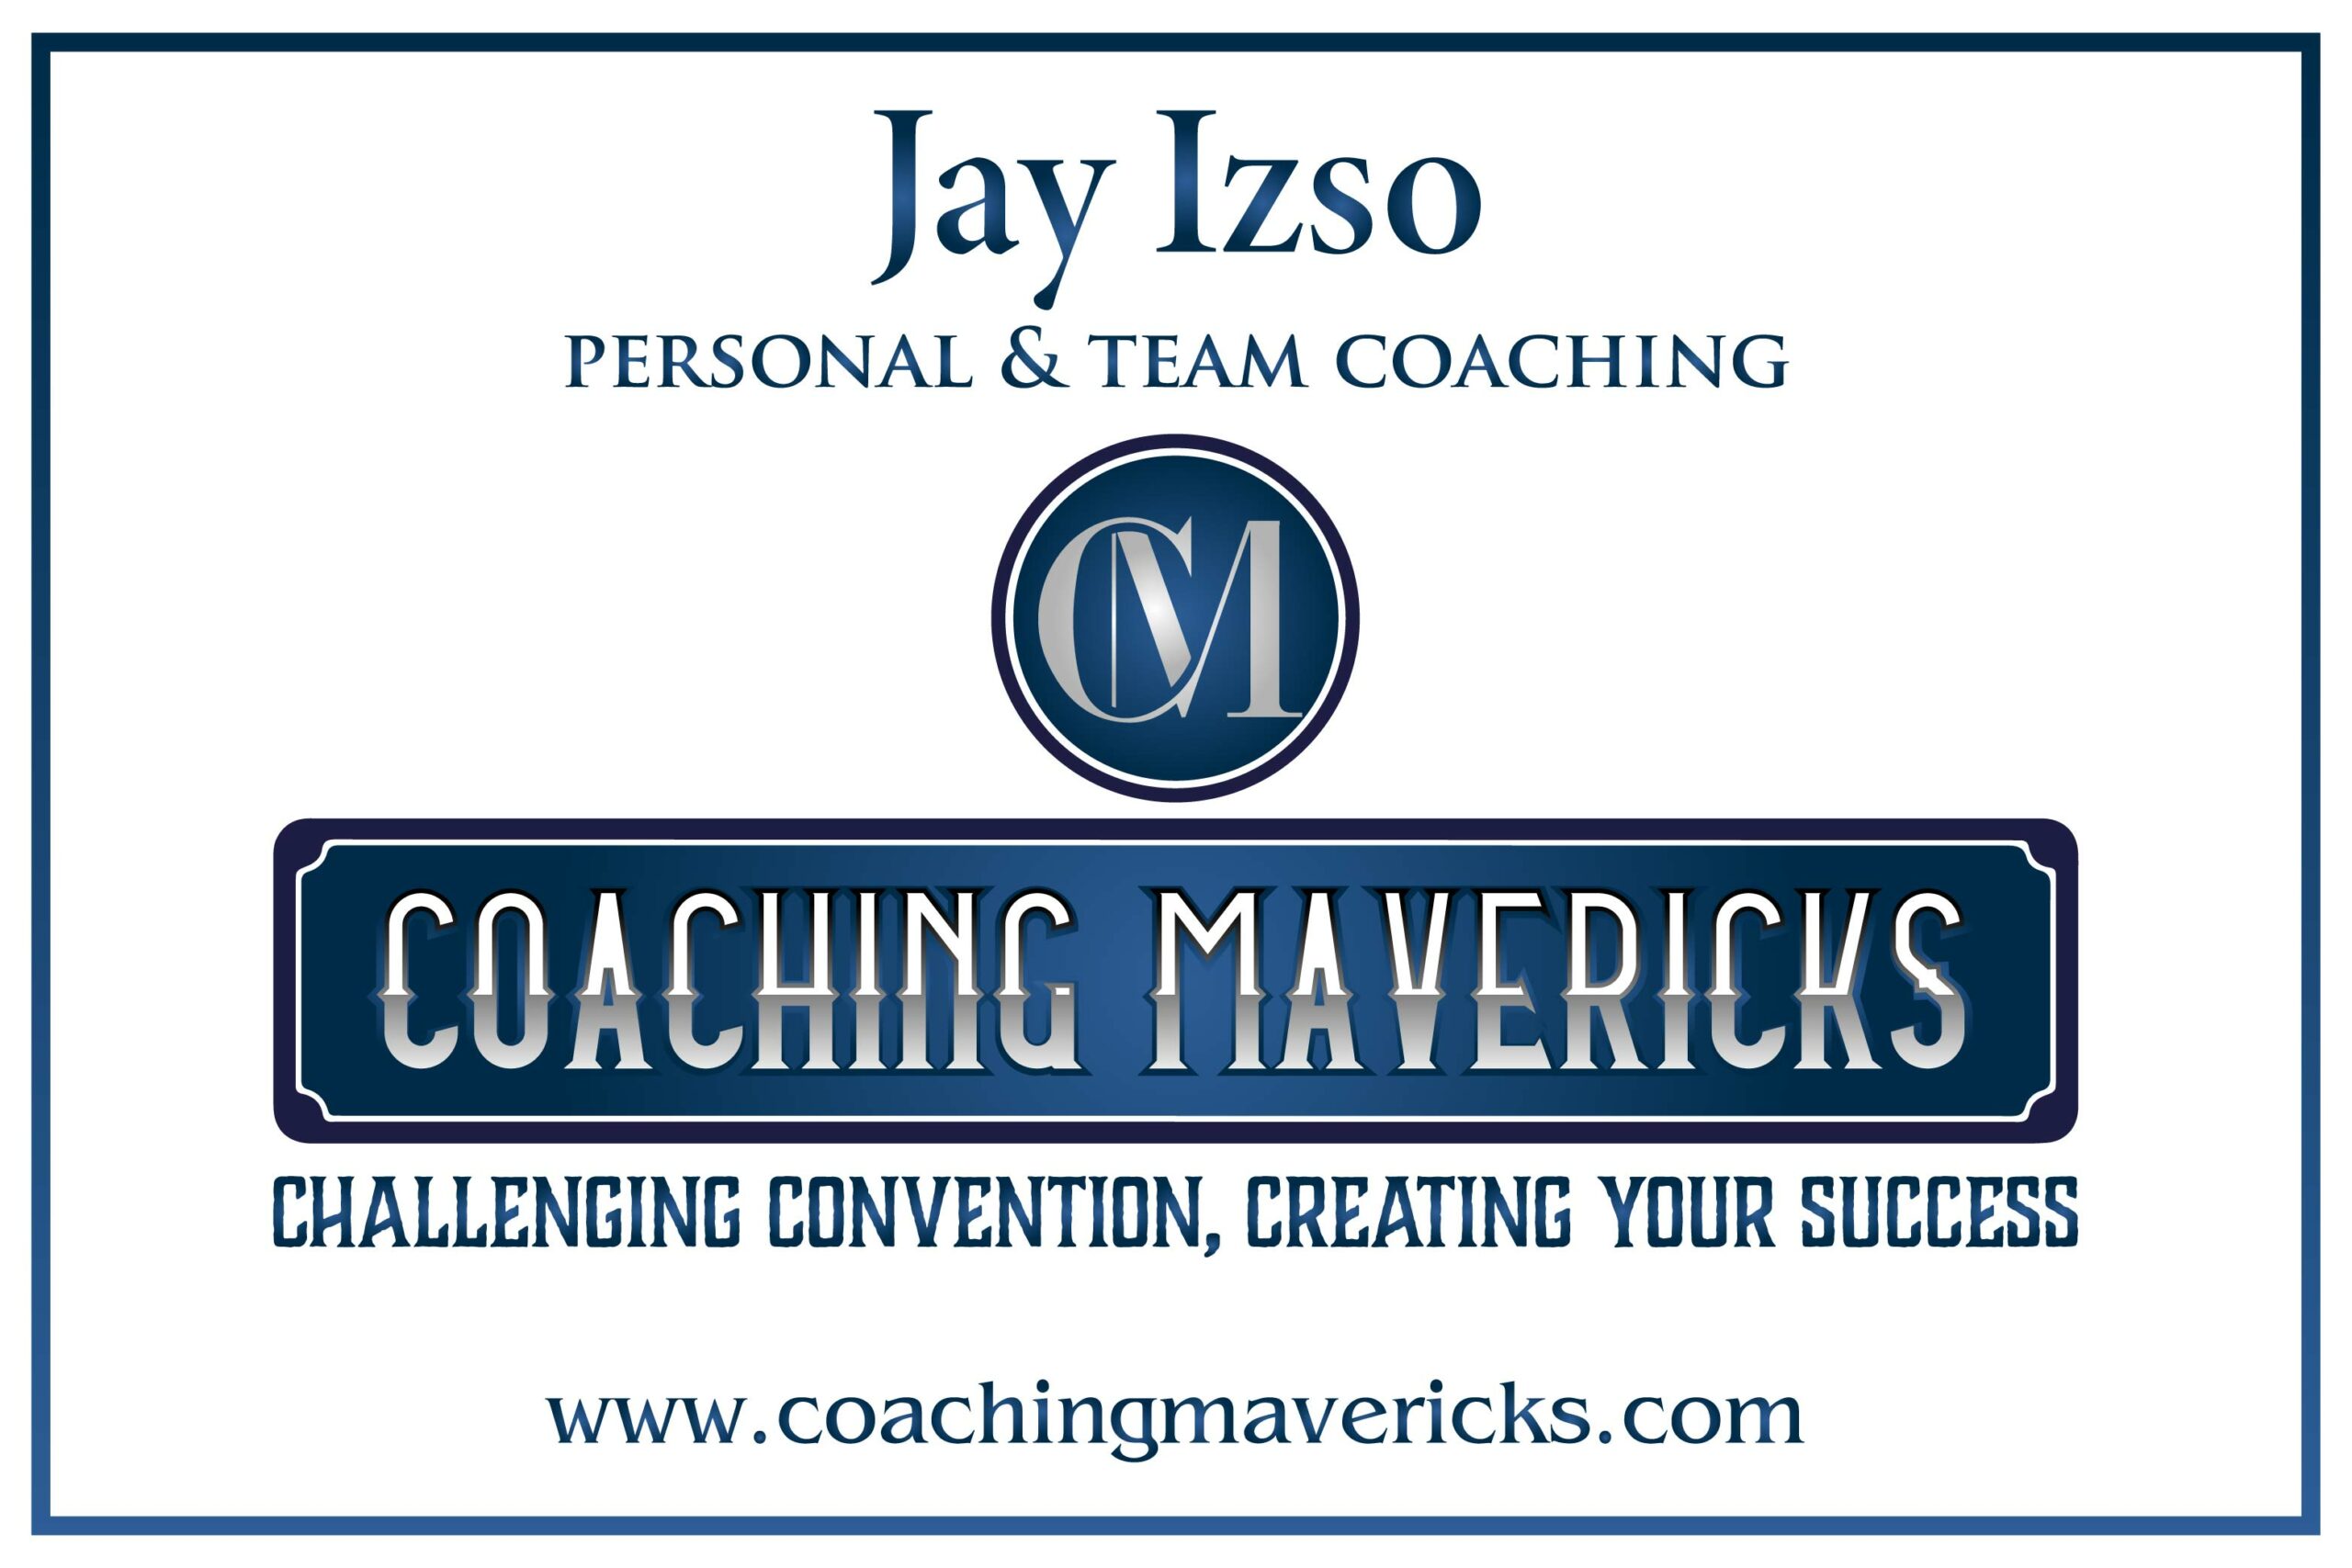 Coaching Mavericks - Coach Jay Izso - Personal and Team Coaching for Life and Business